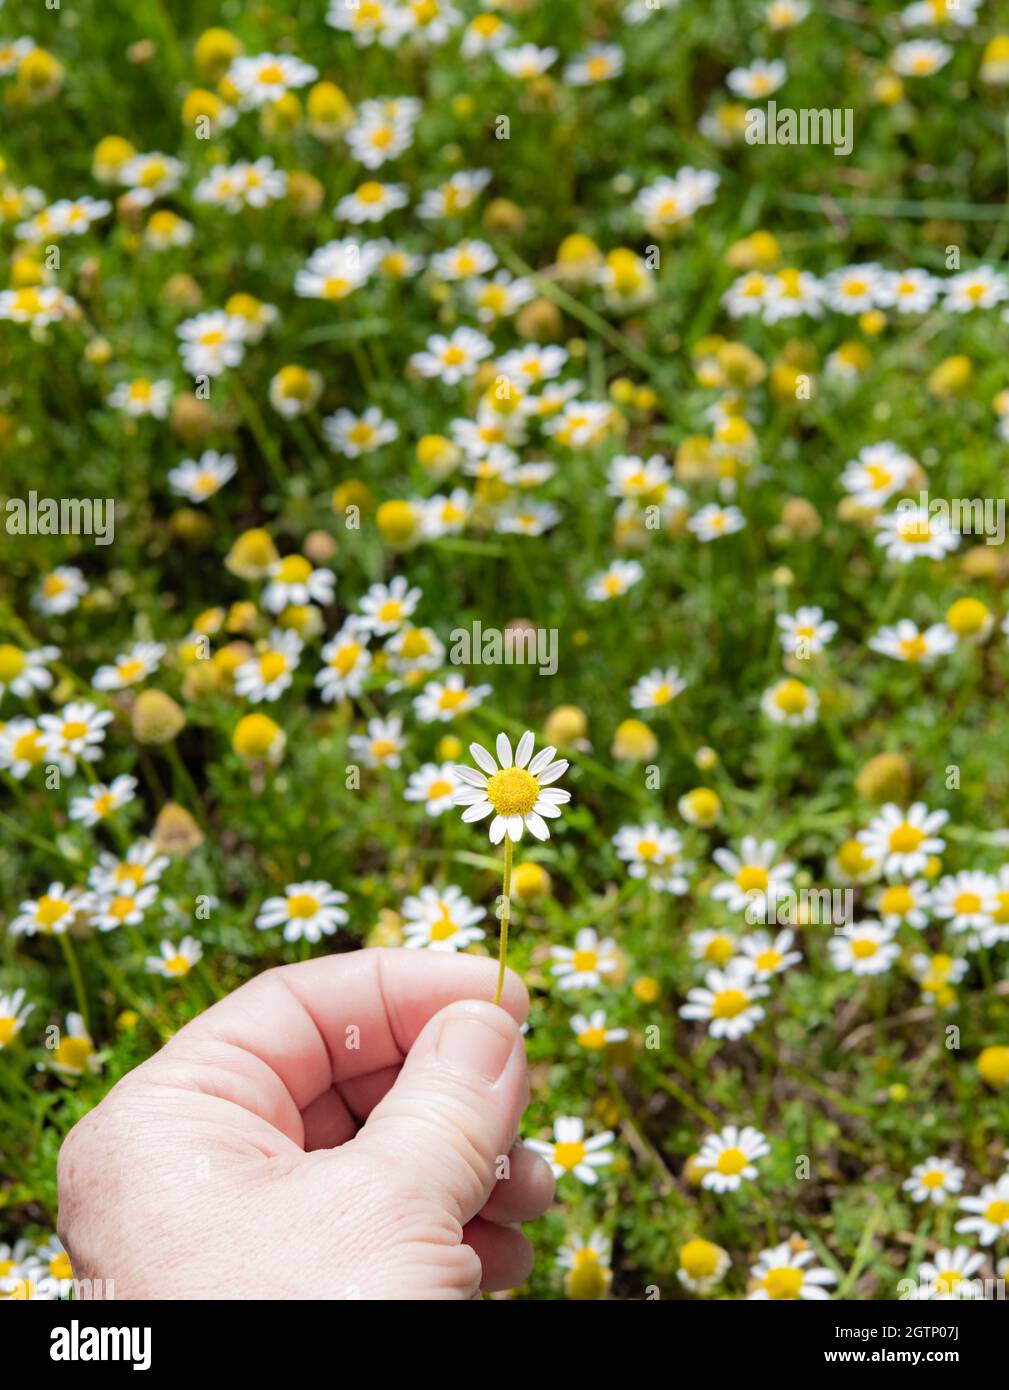 Cropped Hand Holding Flowers Against Plants Stock Photo